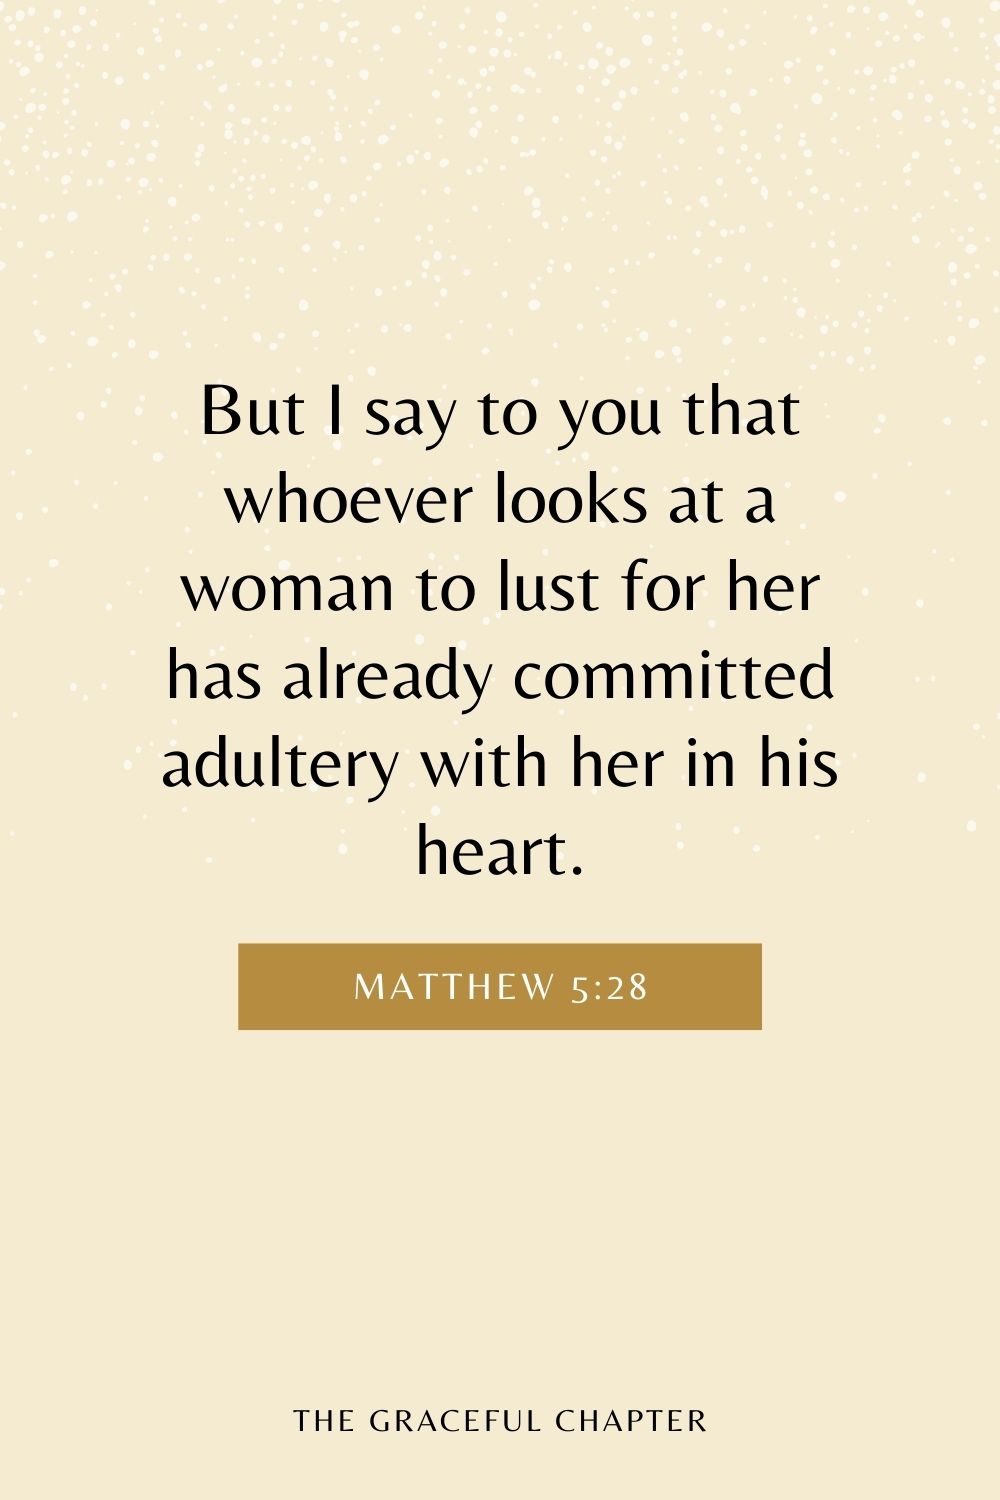 But I say to you that whoever looks at a woman to lust for her has already committed adultery with her in his heart. Matthew 5:28